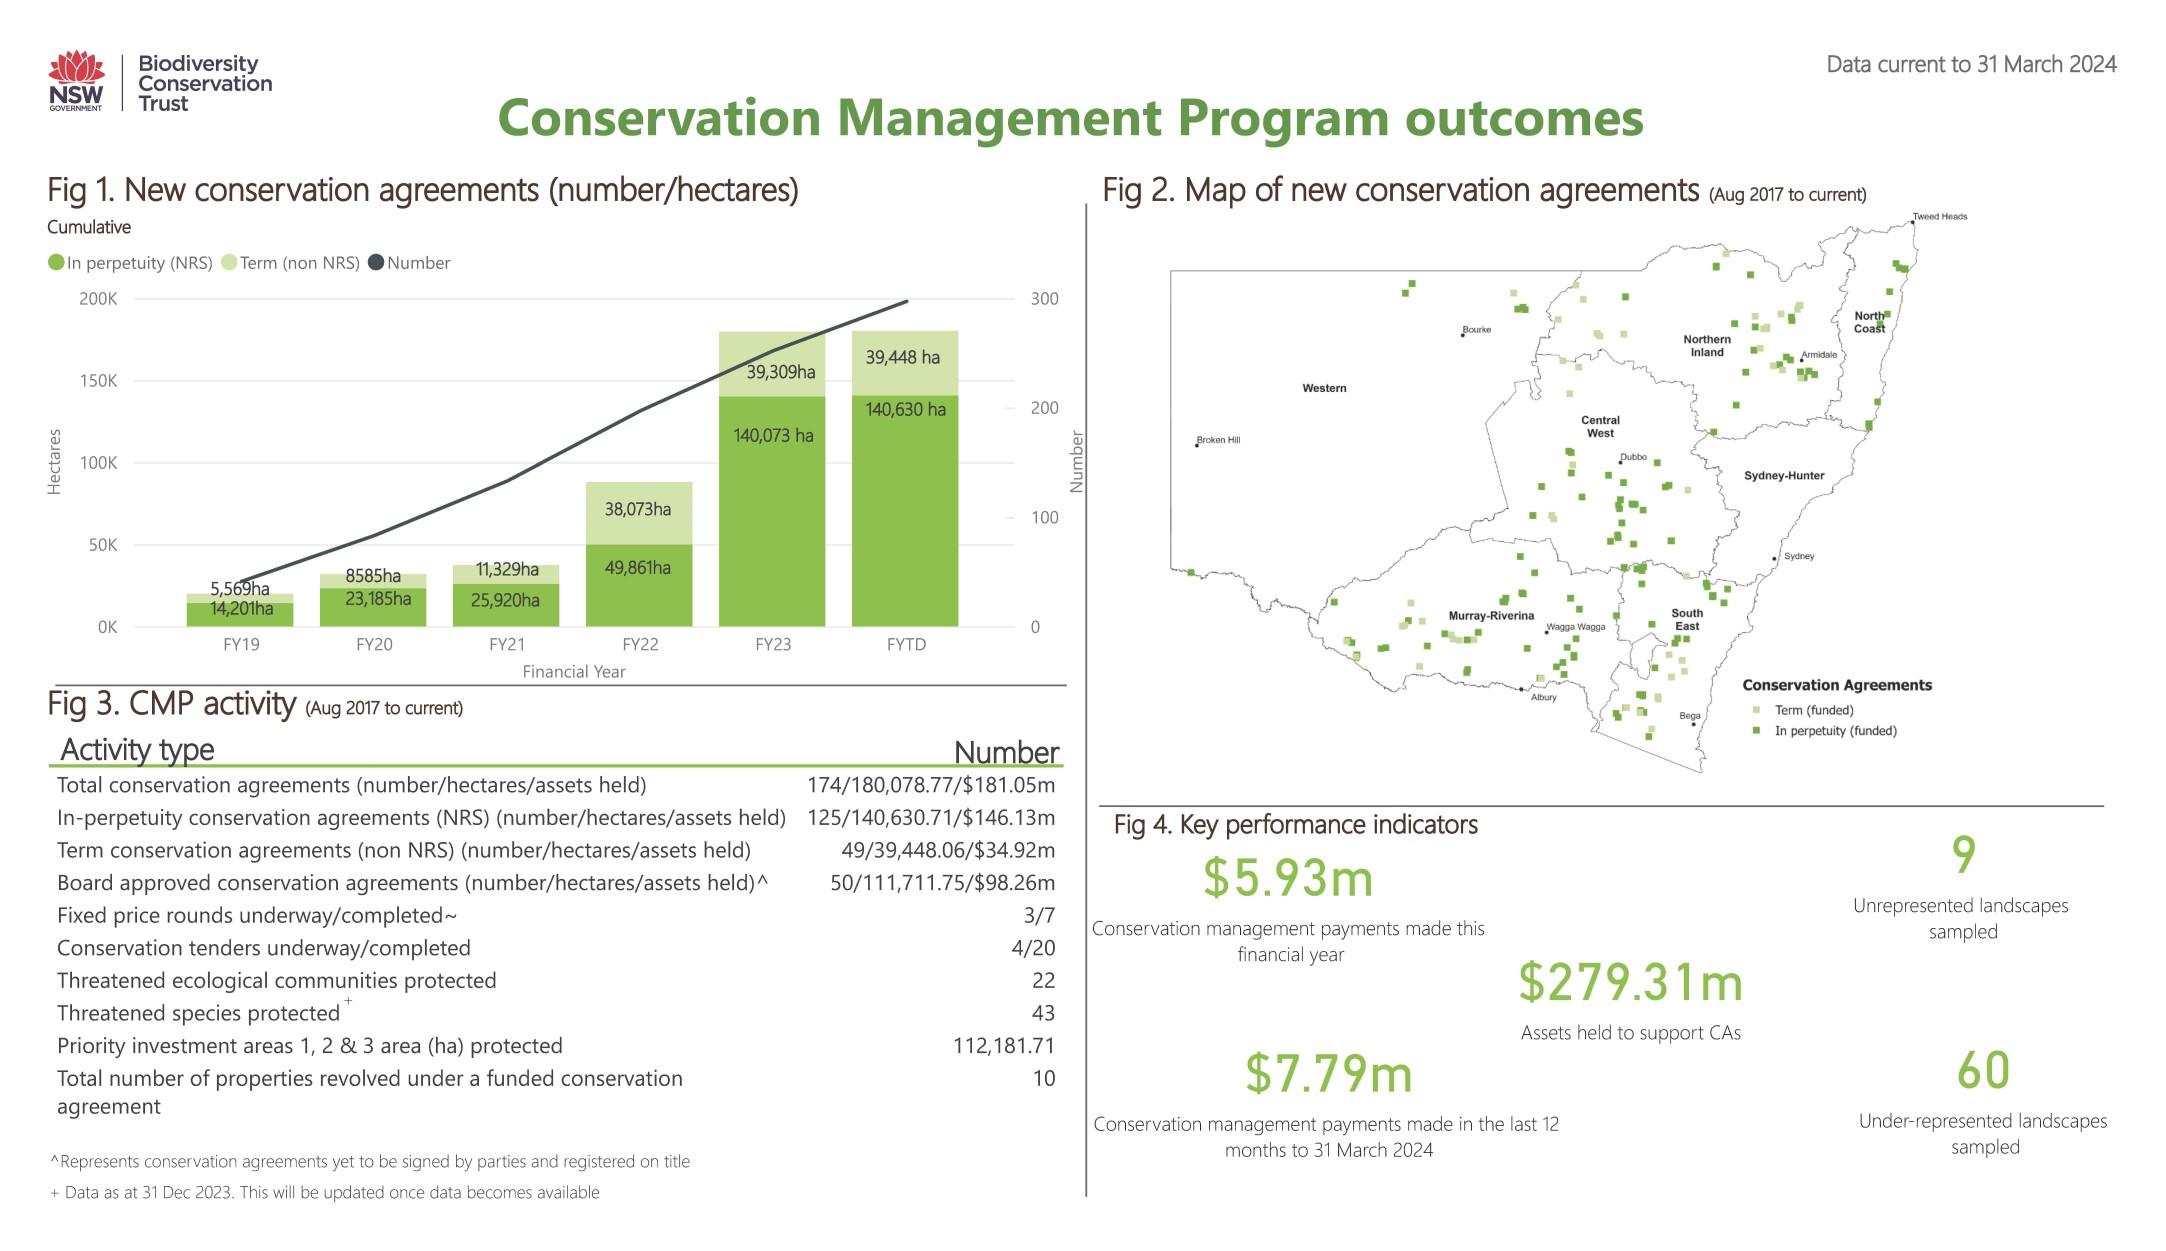 Conservation Management Program dashboard data as at 31 March 2024